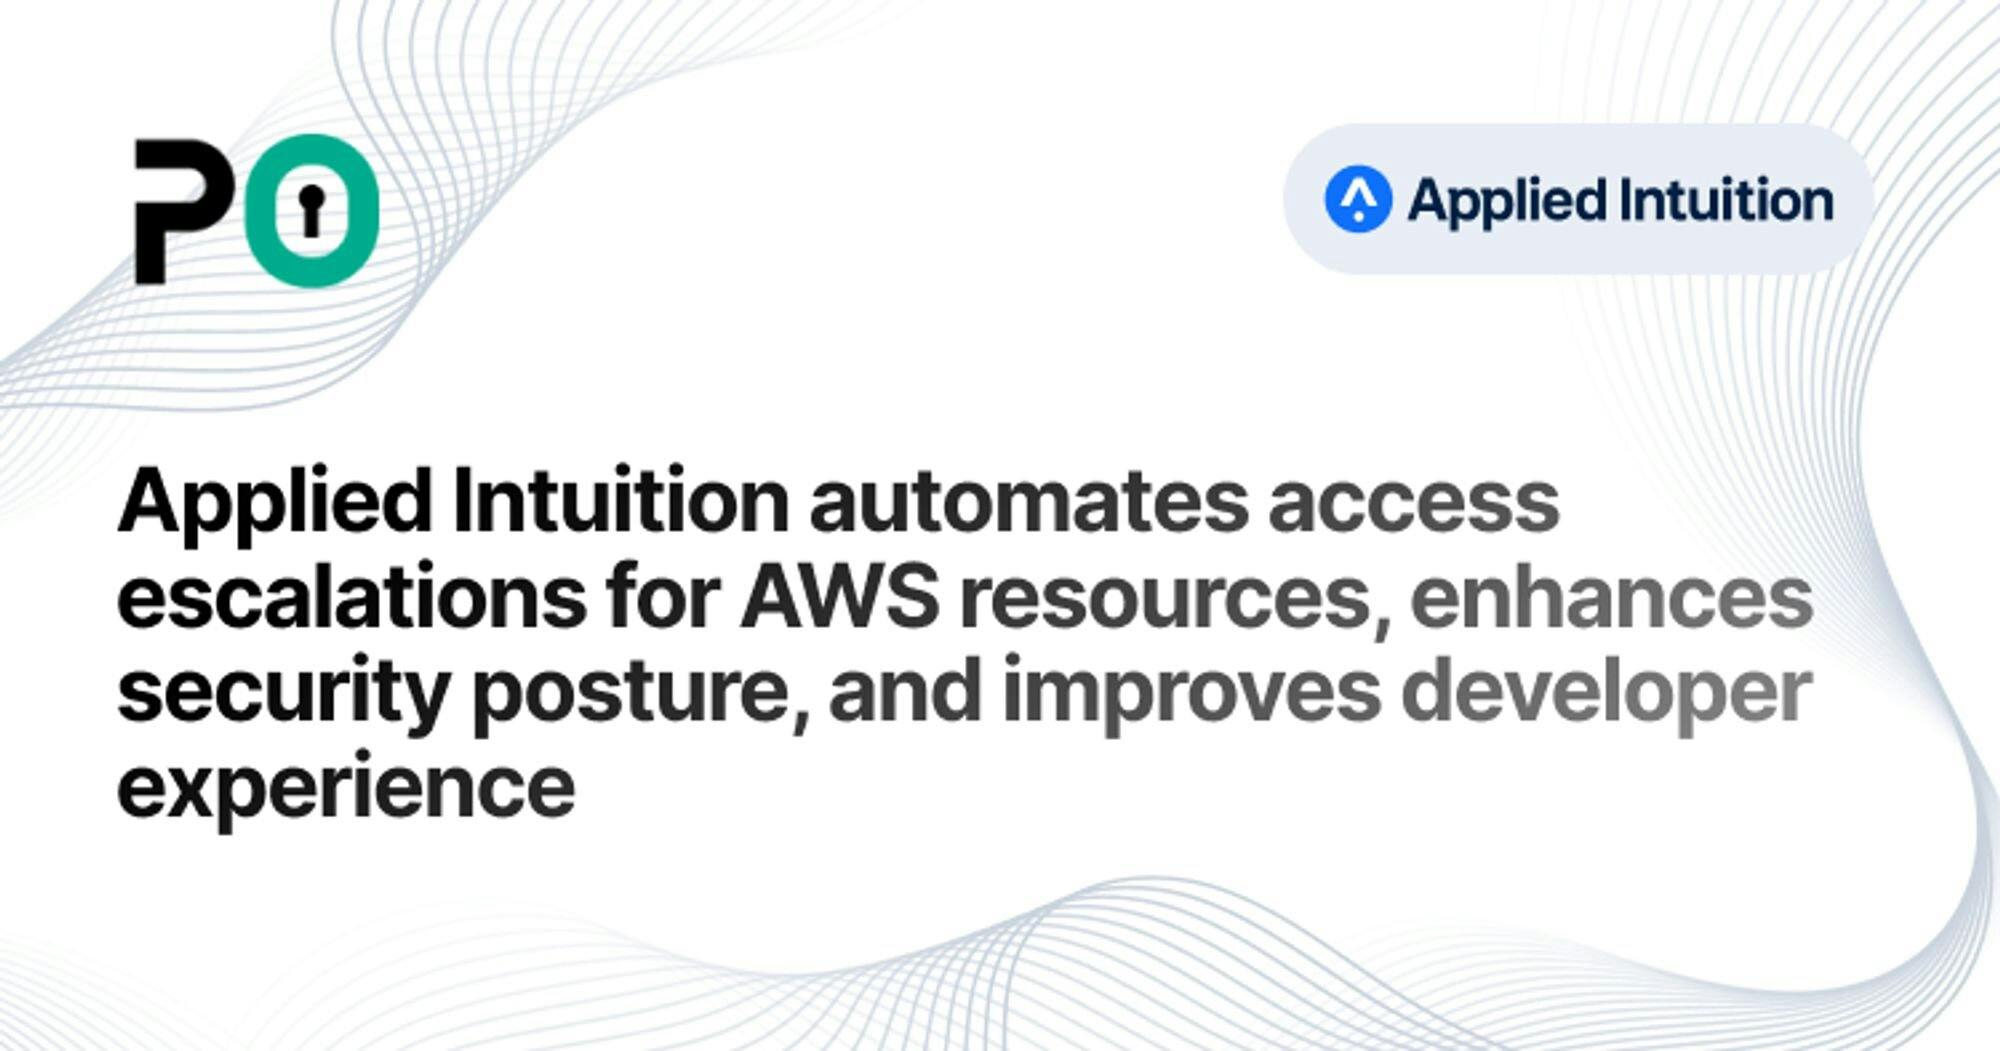 Applied Intuition Reduces Operational Overhead While Improving Security Posture and Dev Experience